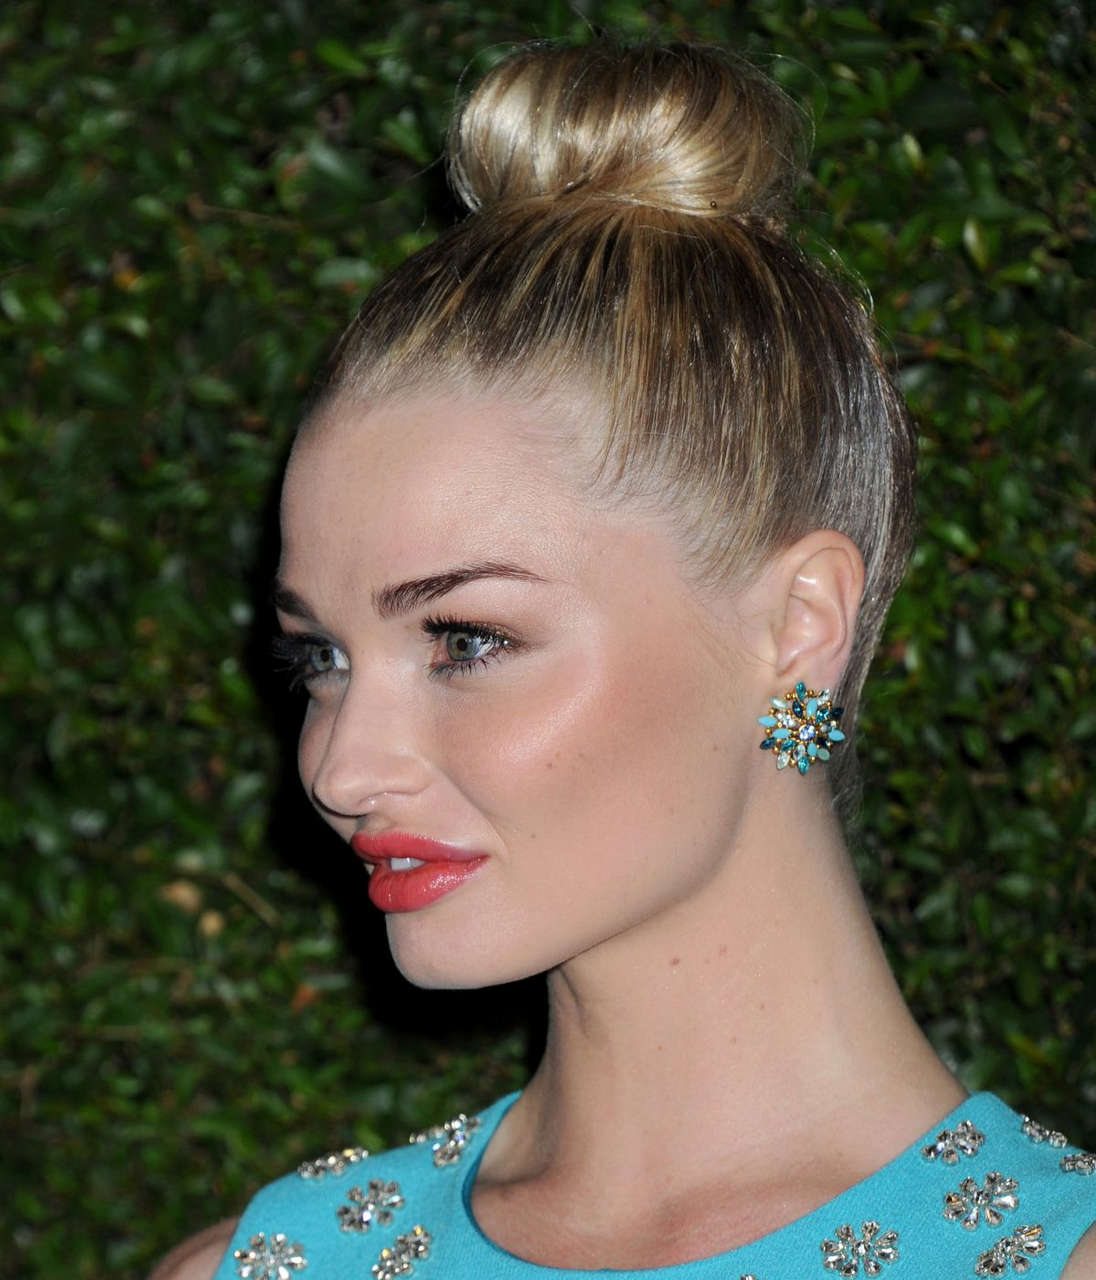 Emma Rigby Michael Kors Launch Claiborne Swanson Franks Young Hollywood